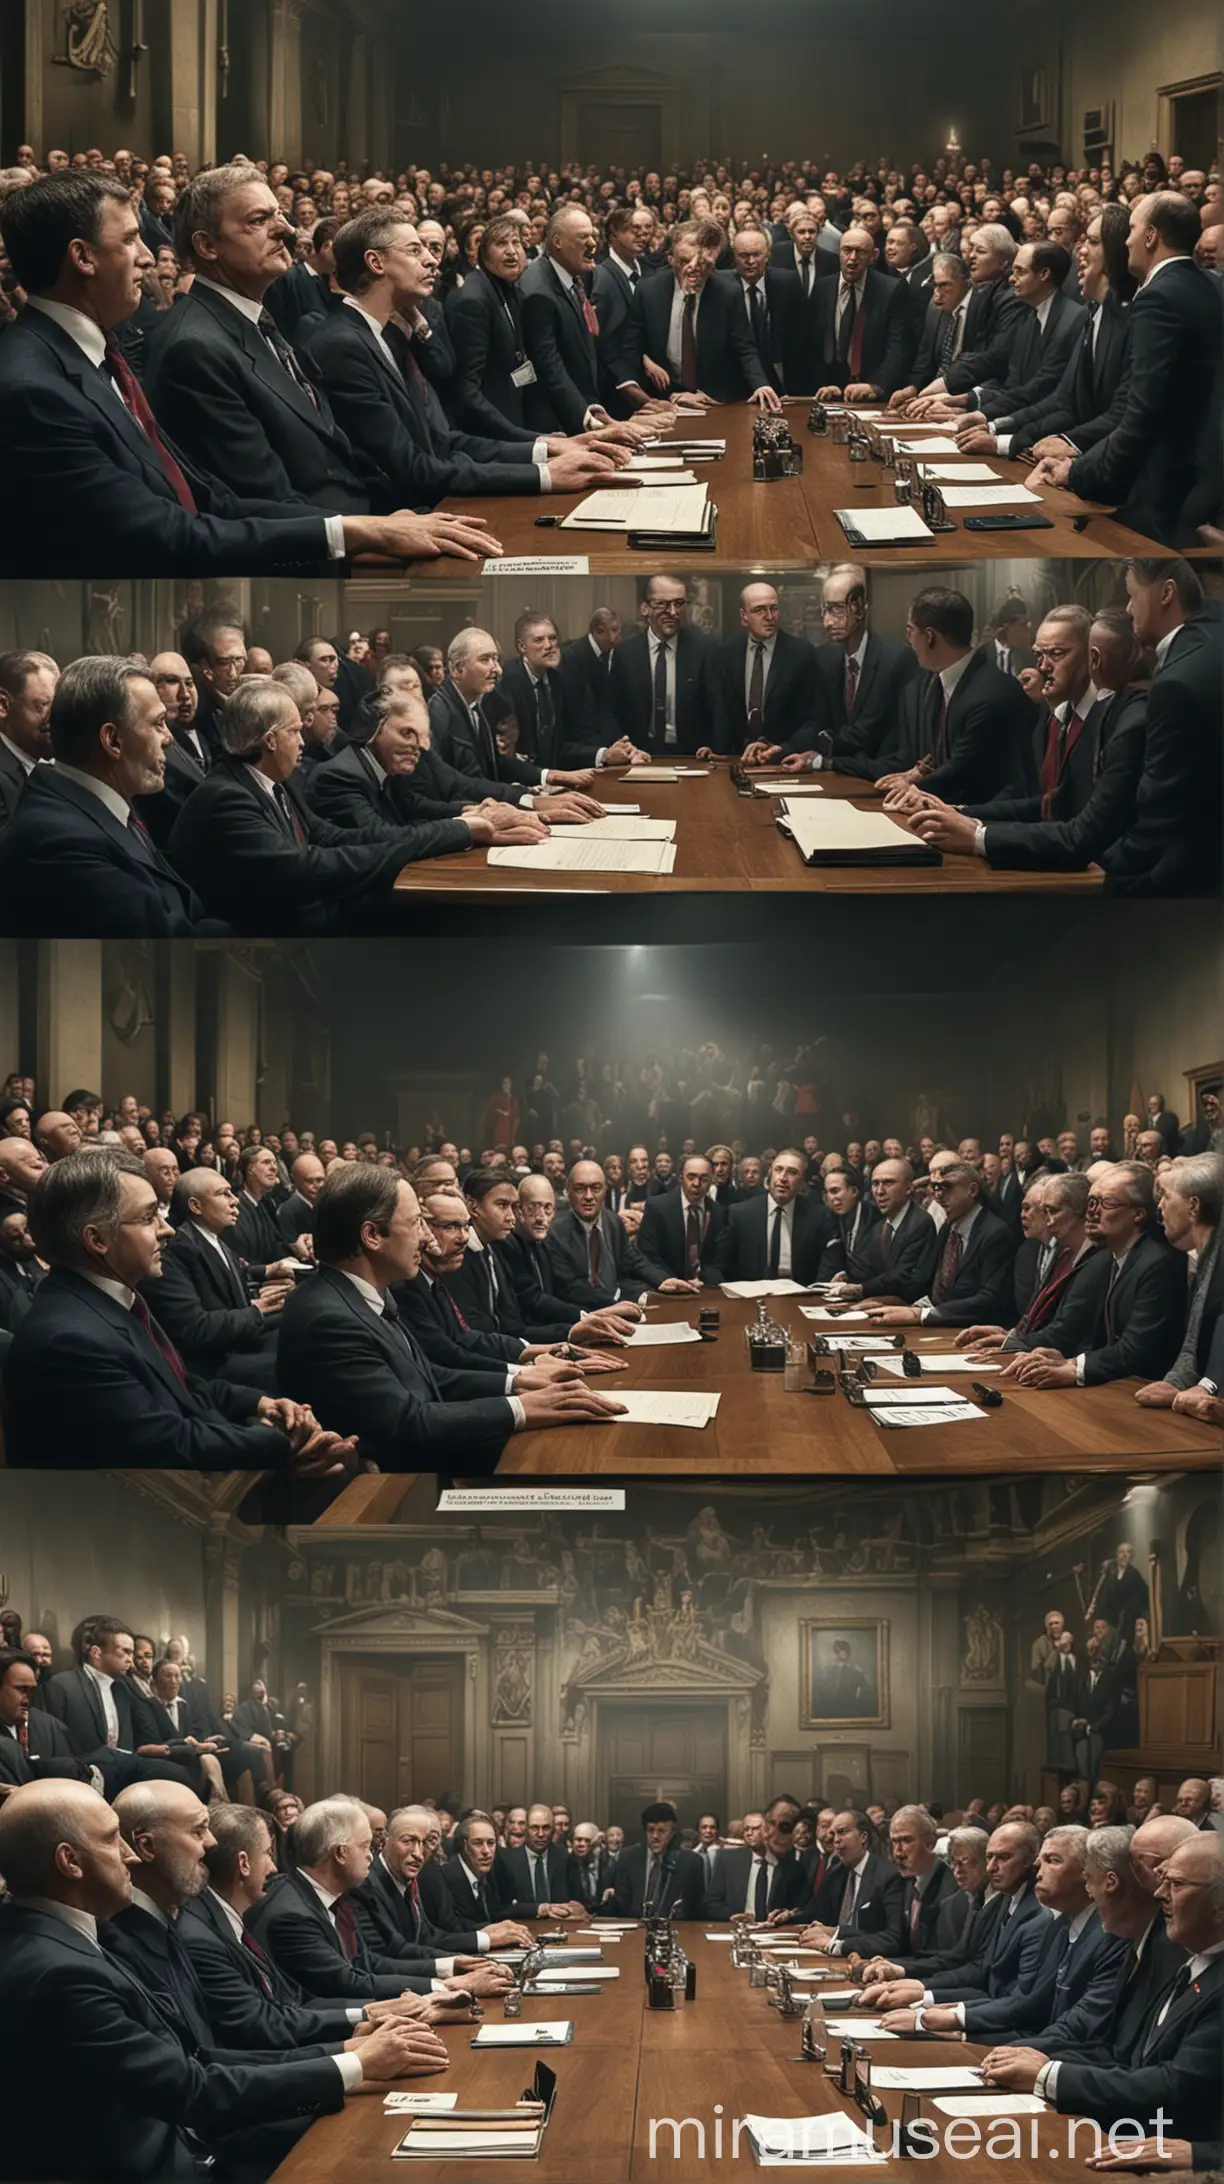 British Government Officials Expressing Conflicting Opinions Realistic SplitScreen Depiction